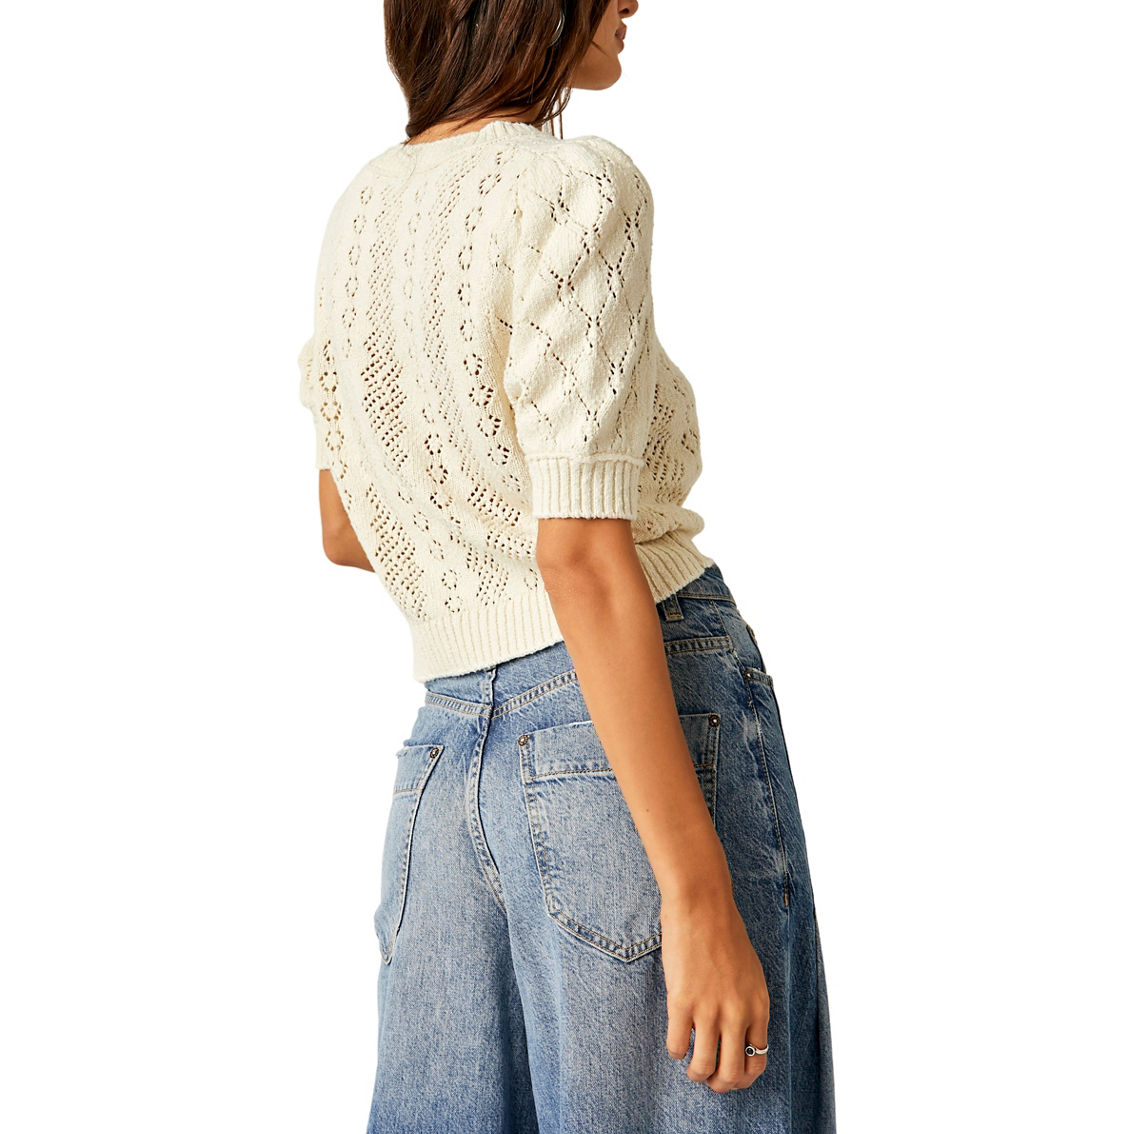 Free People Eloise Pullover - Image 2 of 5